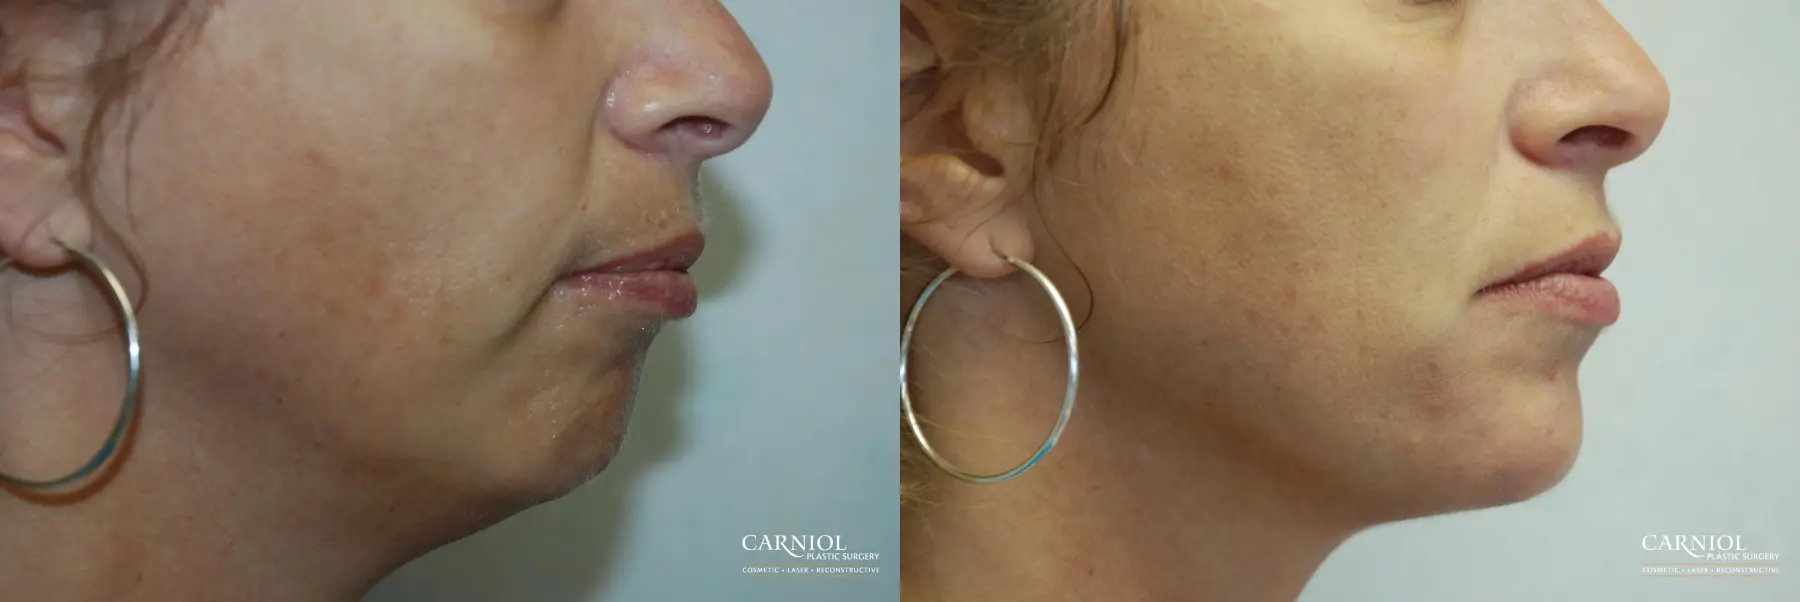 Non-Surgical Facelift: Patient 5 - Before and After 1